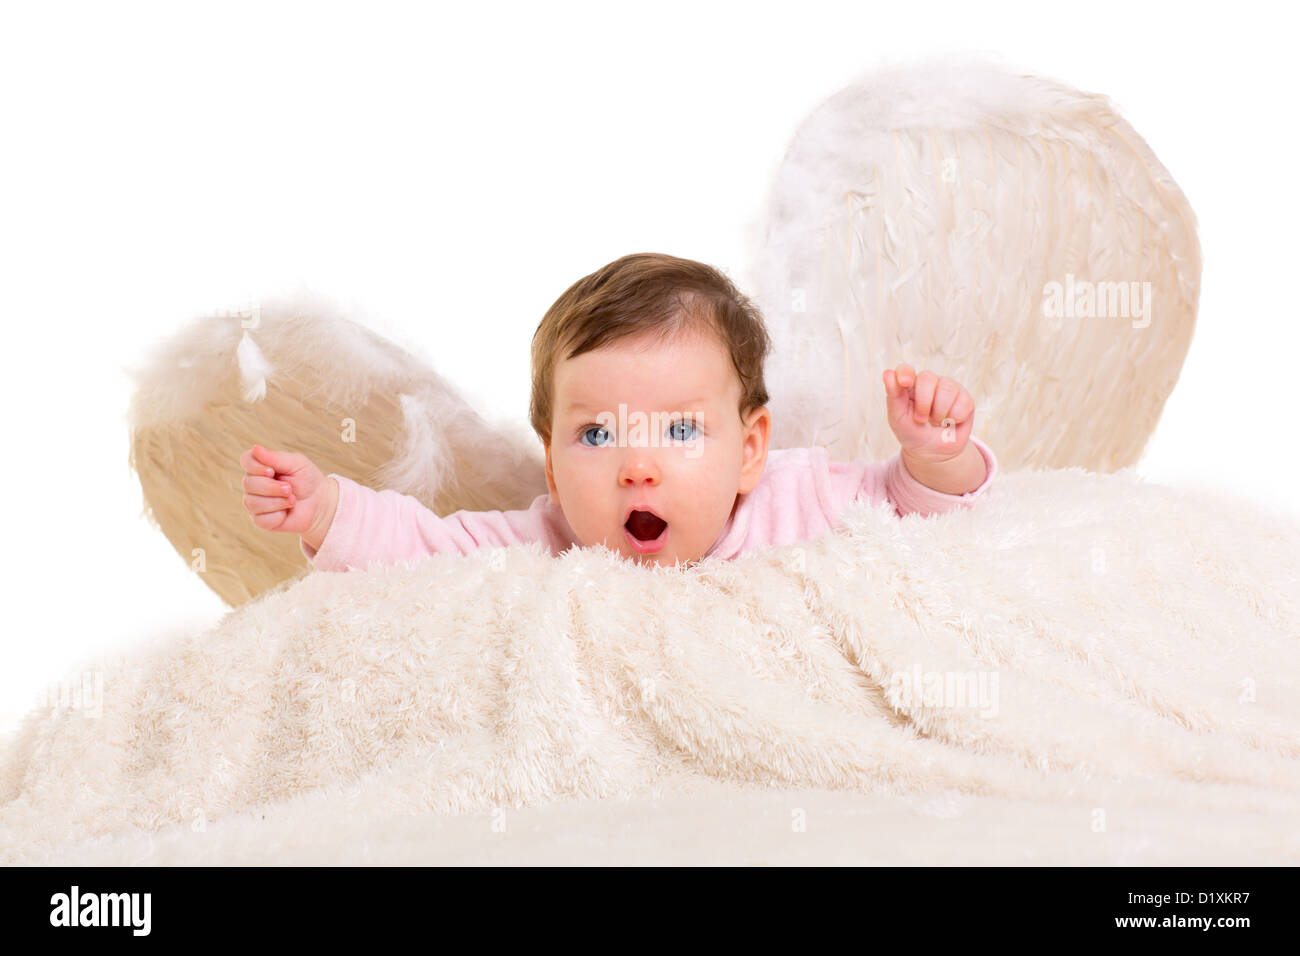 baby girl angel with feather white wings on white fur and open arms Stock Photo